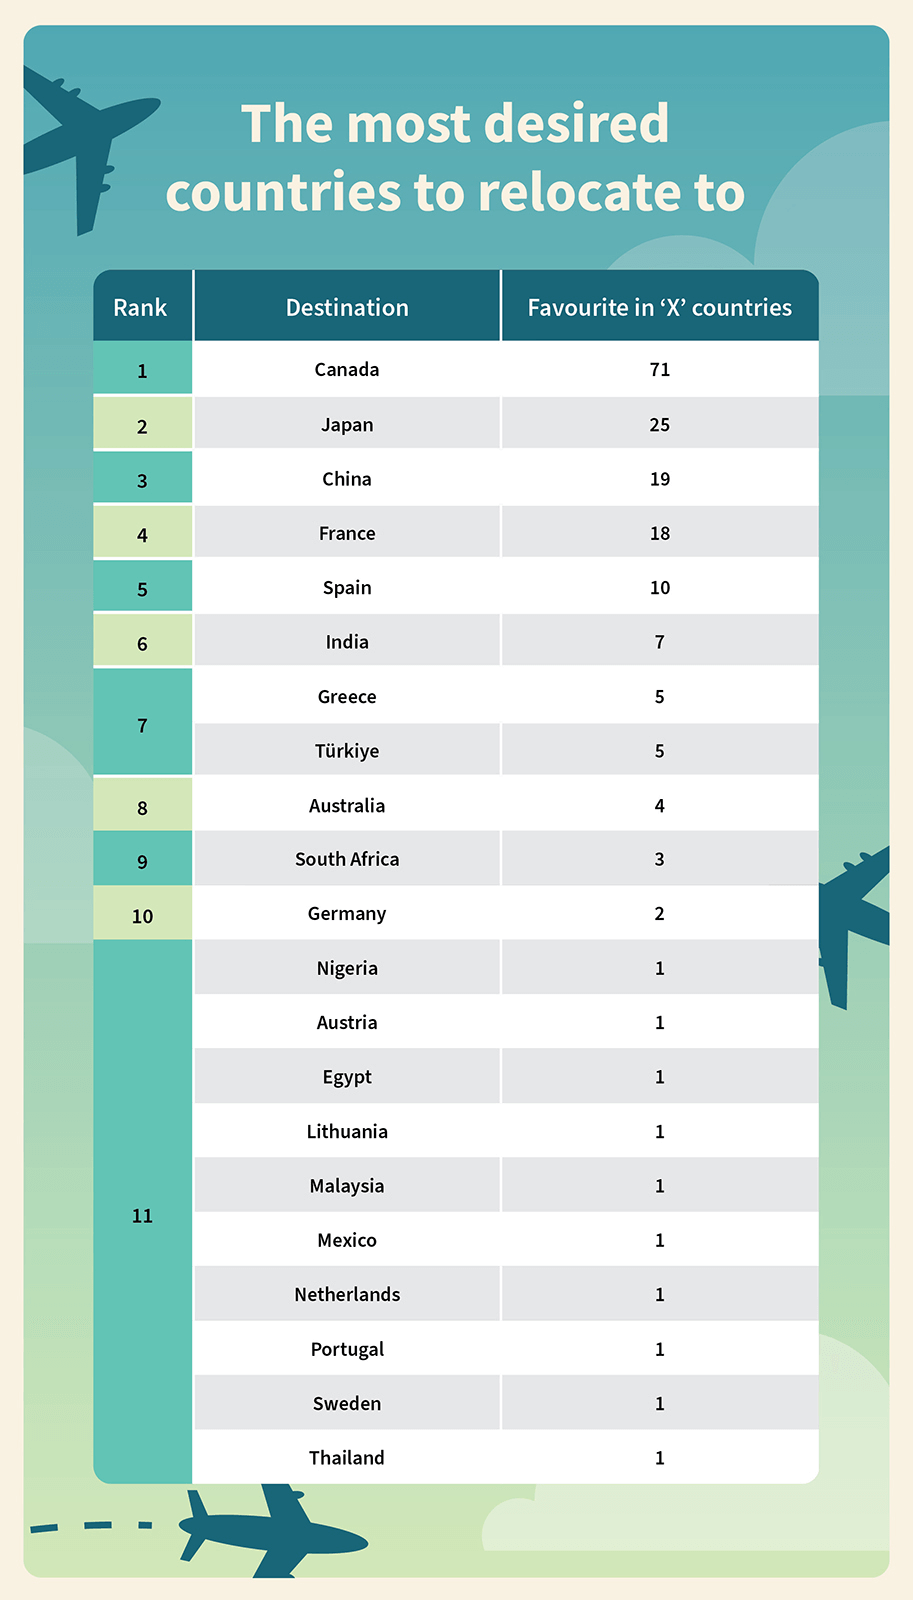 Table showing the most desired countries to relocate to.